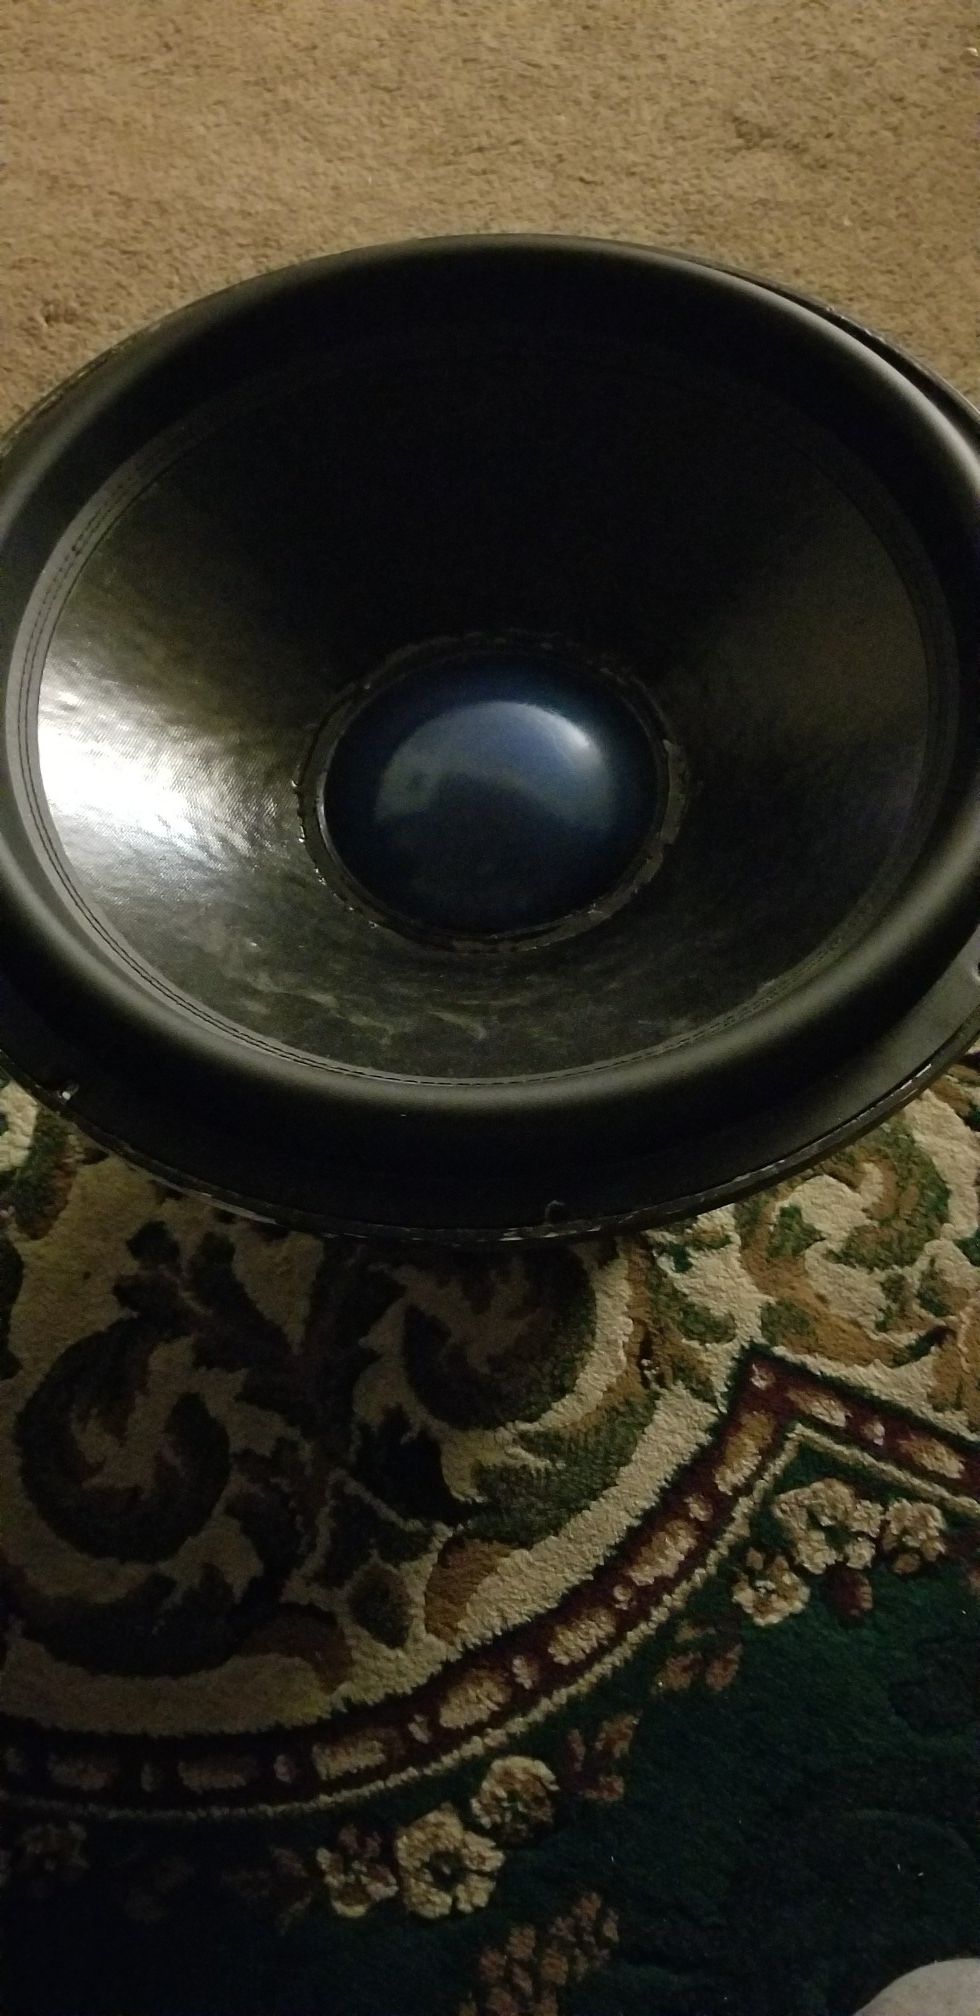 monster 18 inch subwoofer, 4 inch. dual 2ohm voice coil